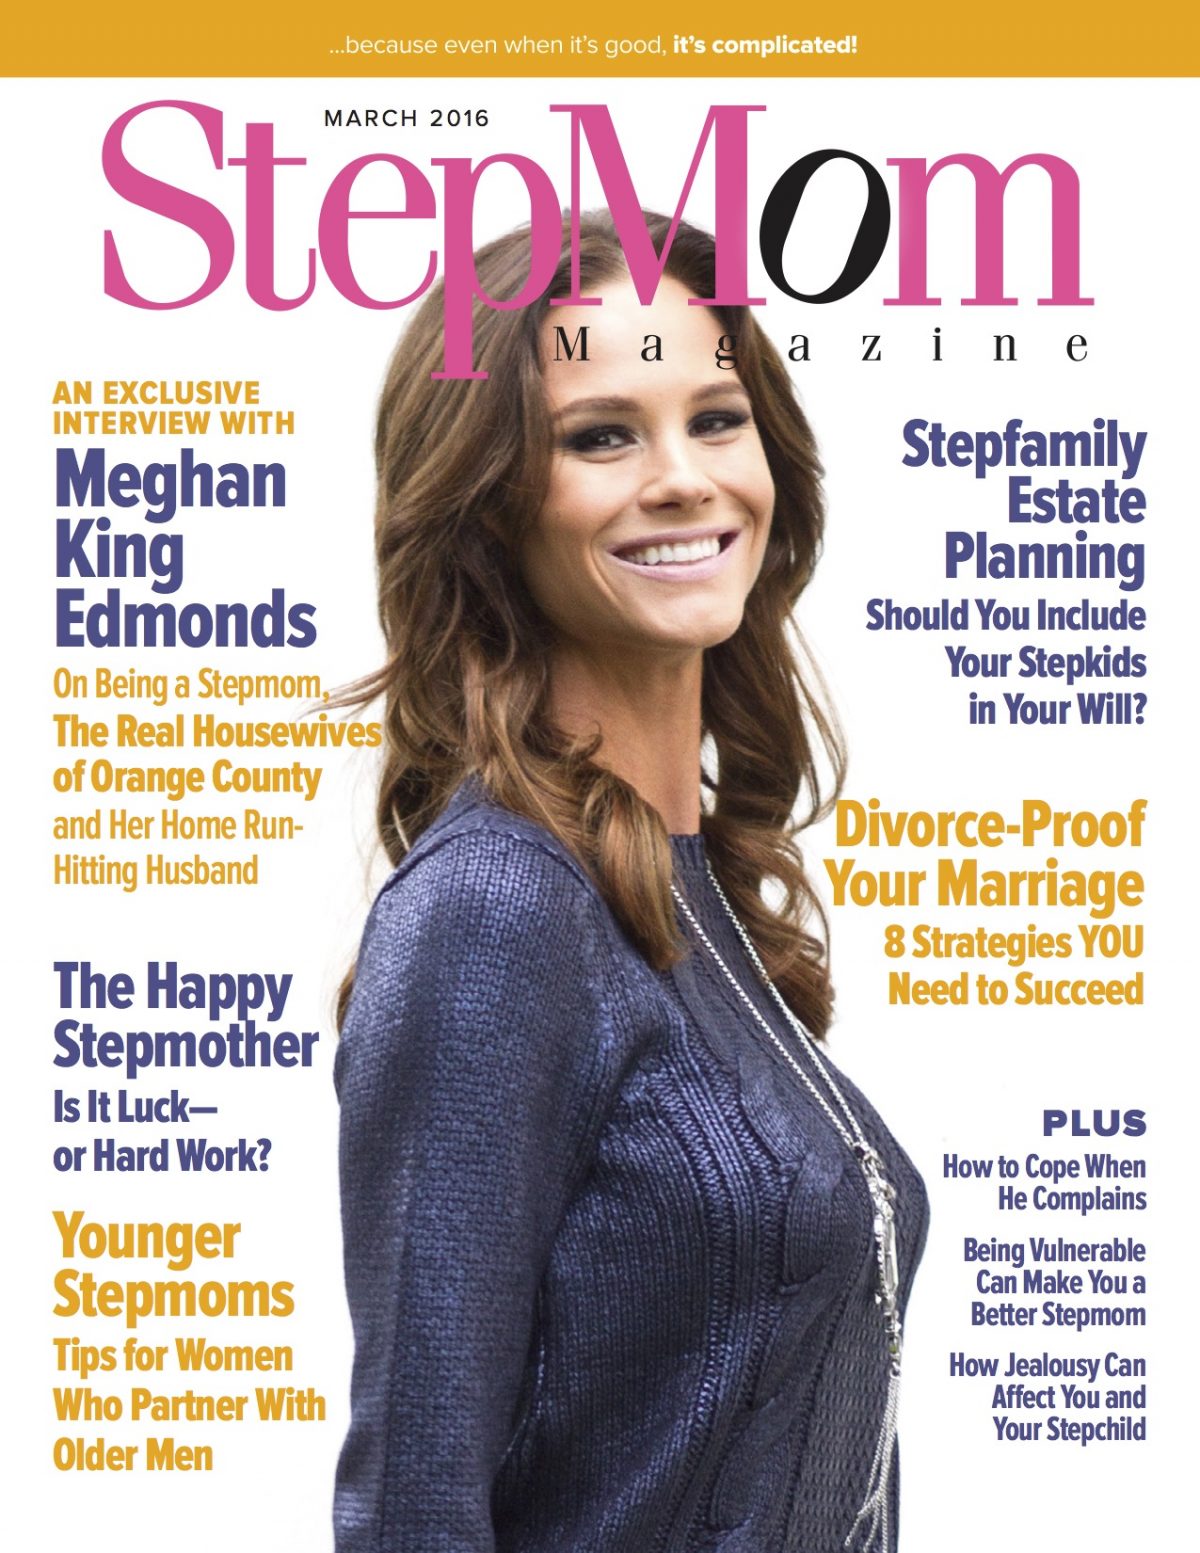 Inside The March 2016 Issue Of Stepmom Magazine 9746